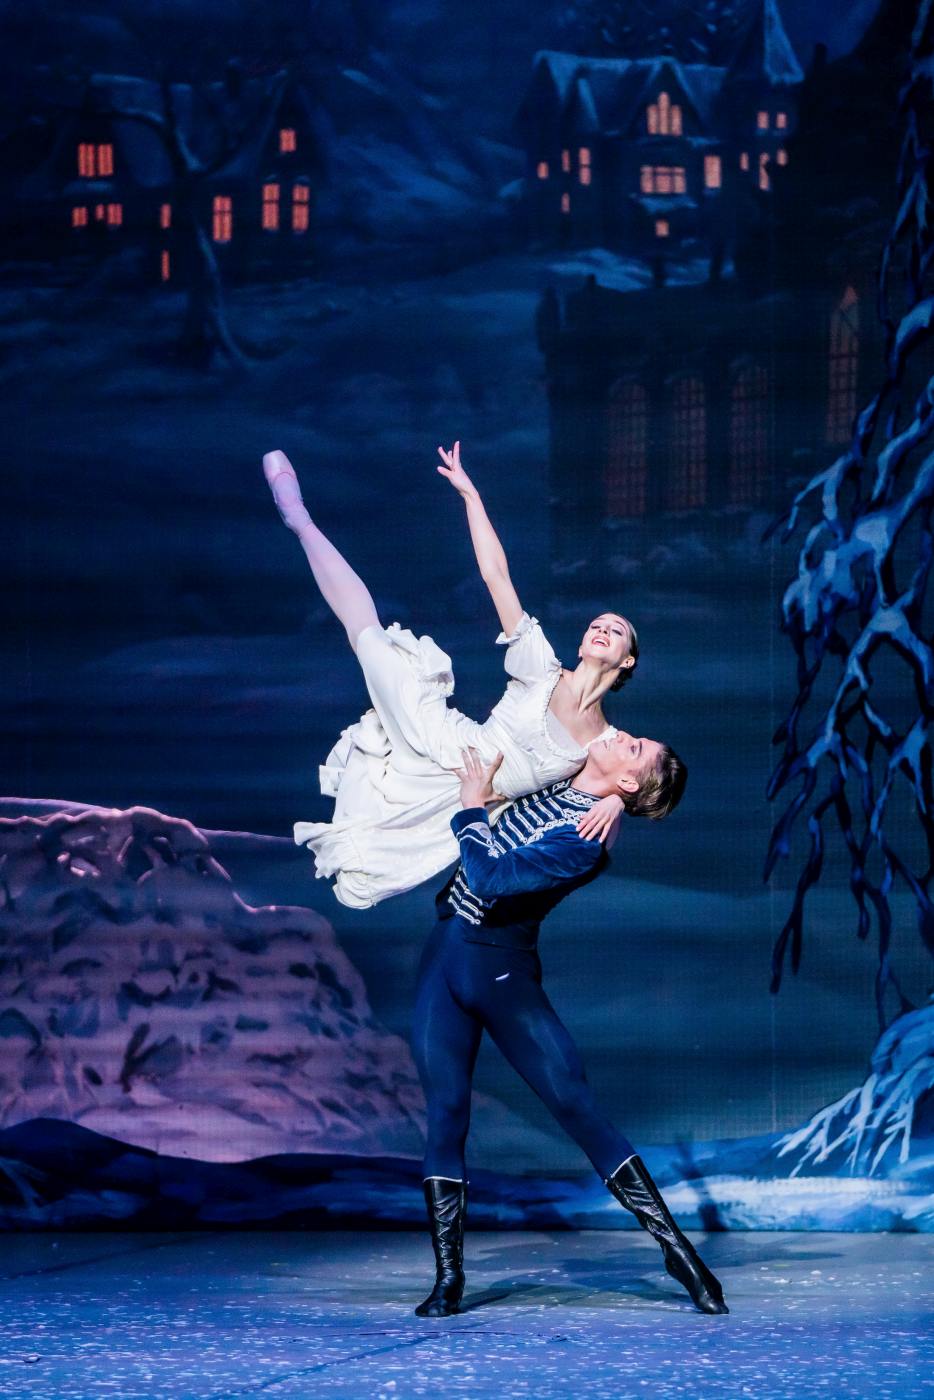 6. M.Beck (Marie) and G.Á.Balázsi (Prince), “The Nutcracker” by W.Eagling and T.Solymosi, Hungarian National Ballet & Hungarian National Ballet Institute 2022 © V.Berecz